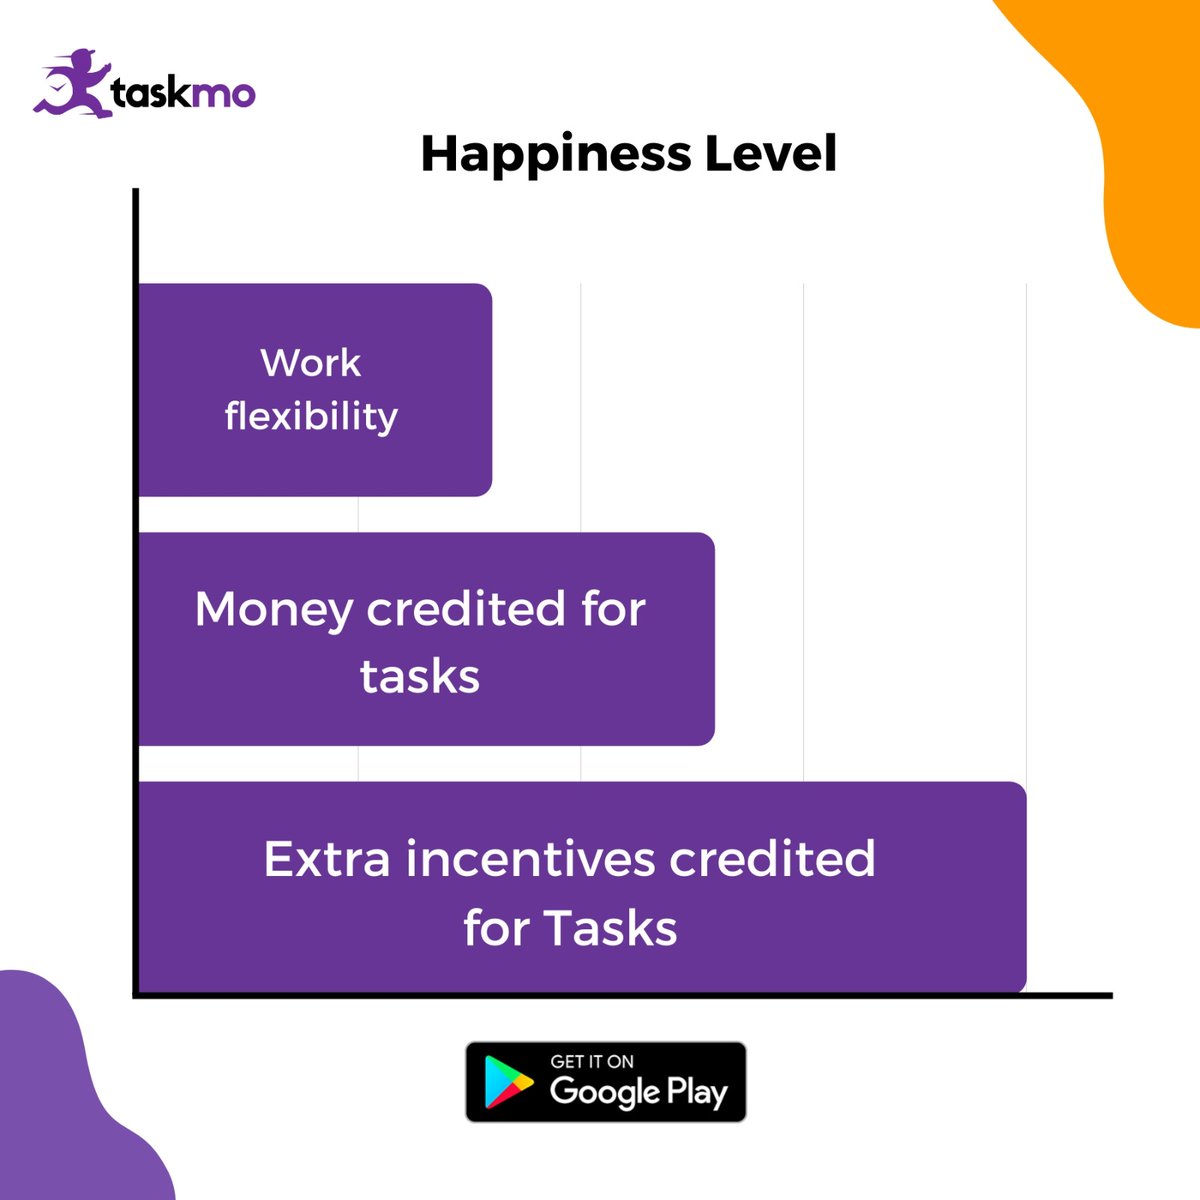 Maximize your happiness and earnings with Taskmo. 😁

Download the Taskmo app, select the task, complete it, and earn instantly with extra incentives. 
✅ No Degree required
✅ No age bar
✅ No restricted timing
Just Be Your Own Boss 😎

#gigwork #partimetimejob #gigjobs #Jobs